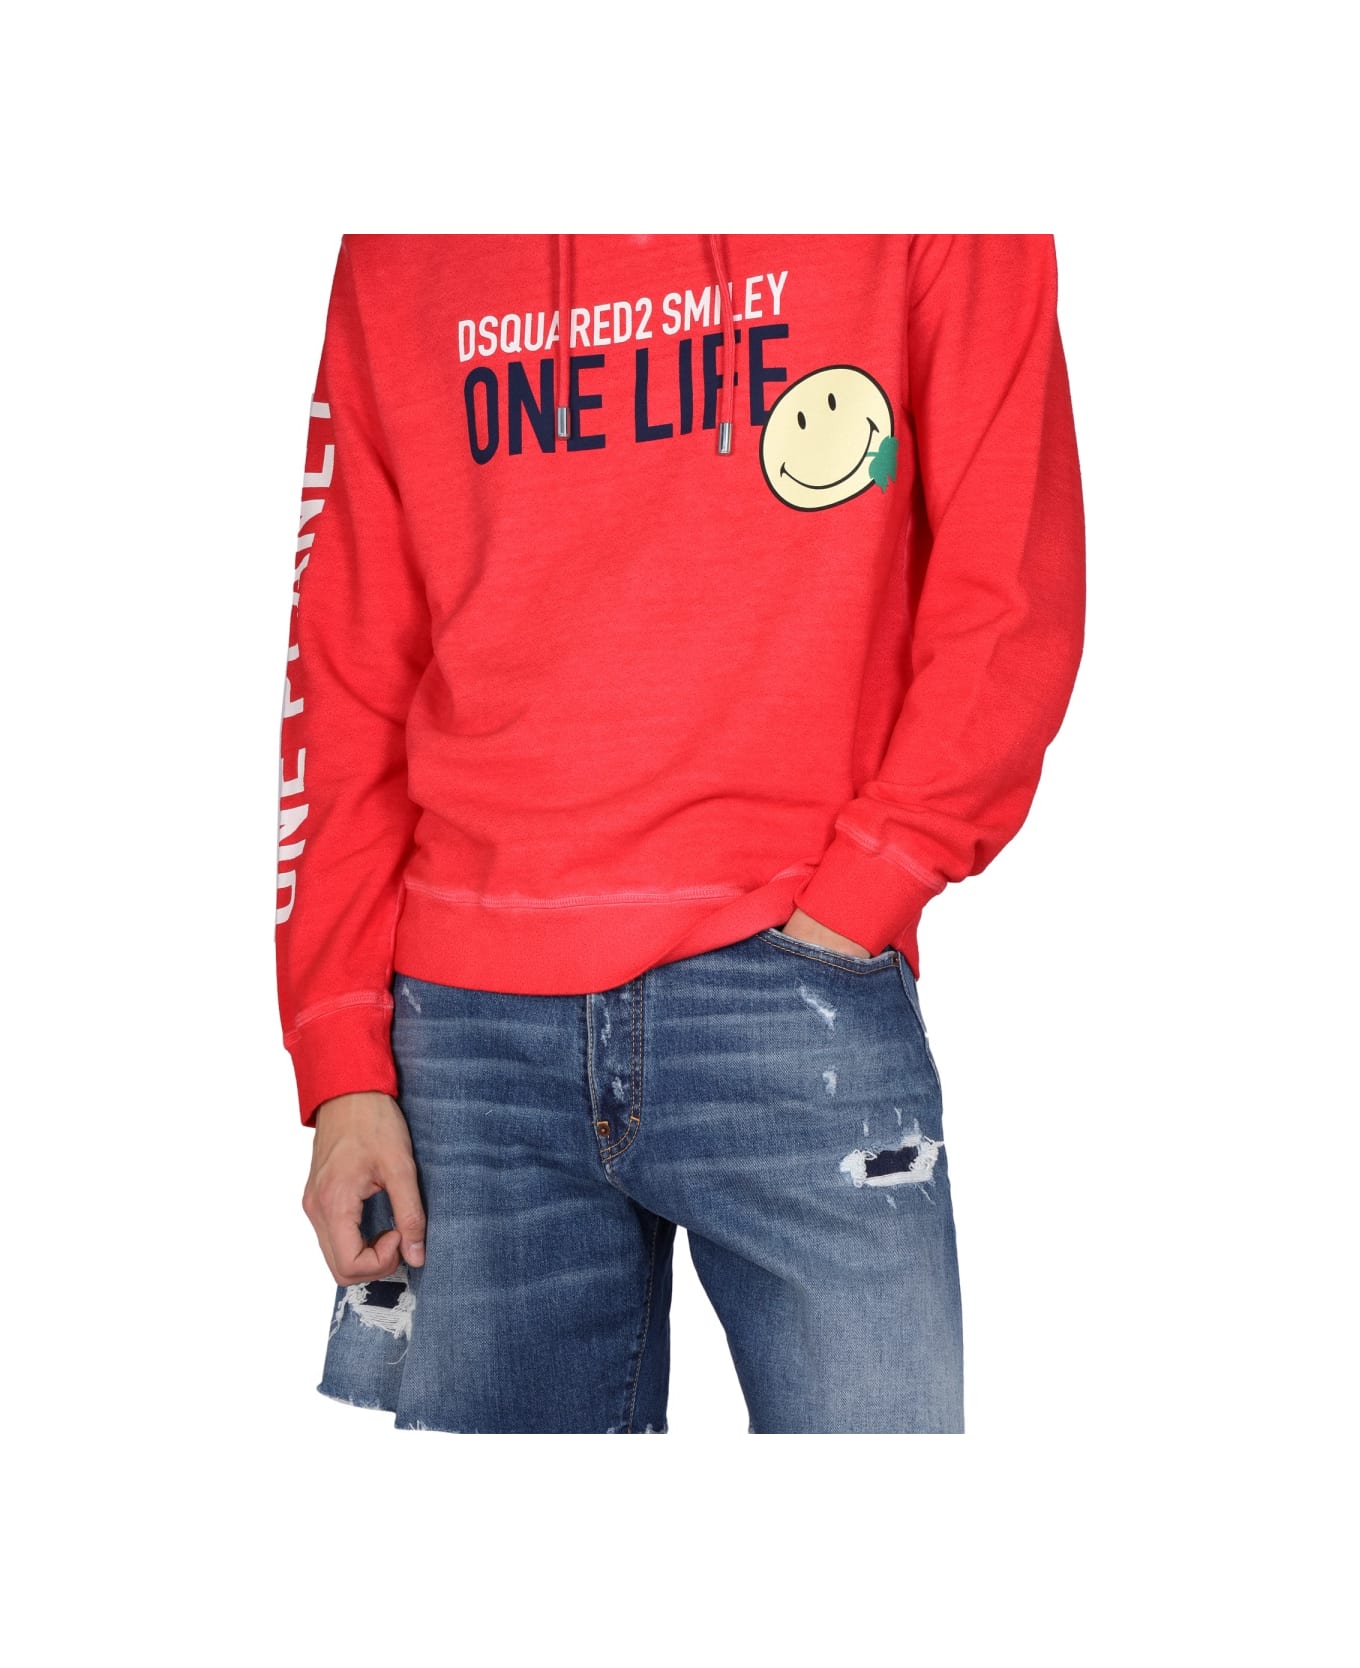 Dsquared2 "one Life One Planet Smiley" Sweatshirt - RED